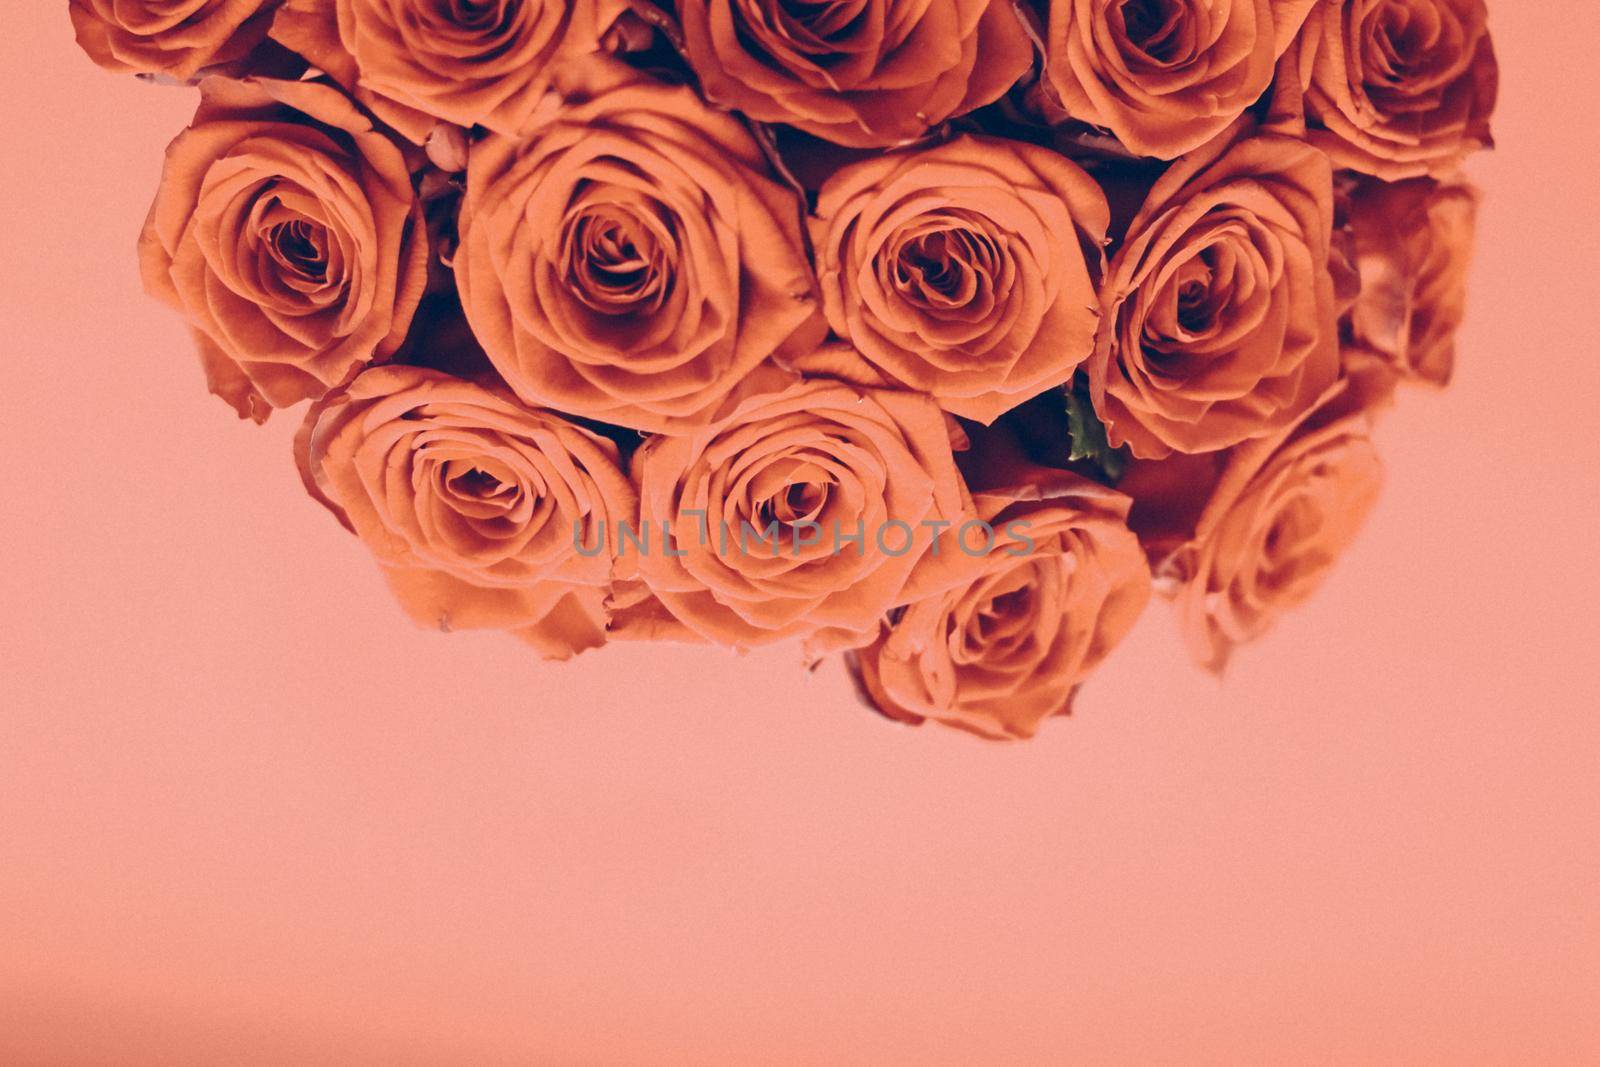 Blooming rose, flower blossom and Valentines Day gift concept - Vintage luxury bouquet of orange roses, flowers in bloom as floral holiday background